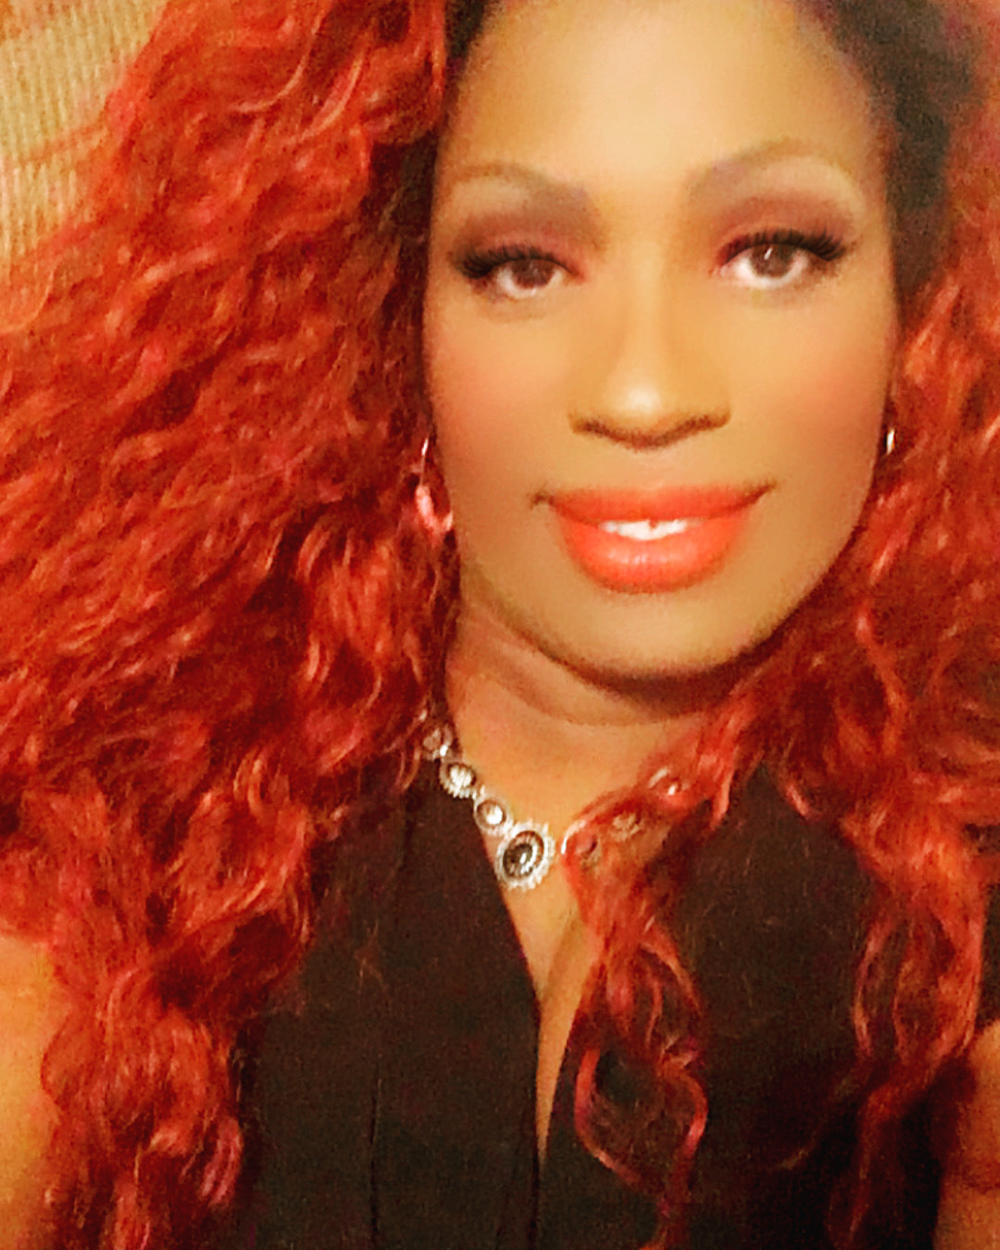 Ashley Diamond fought Georgia's prison system in a 2015 lawsuit that highlighted the conditions she faced as an incarcerated transgender woman who was denied hormone treatments she had been taking for 17 years.